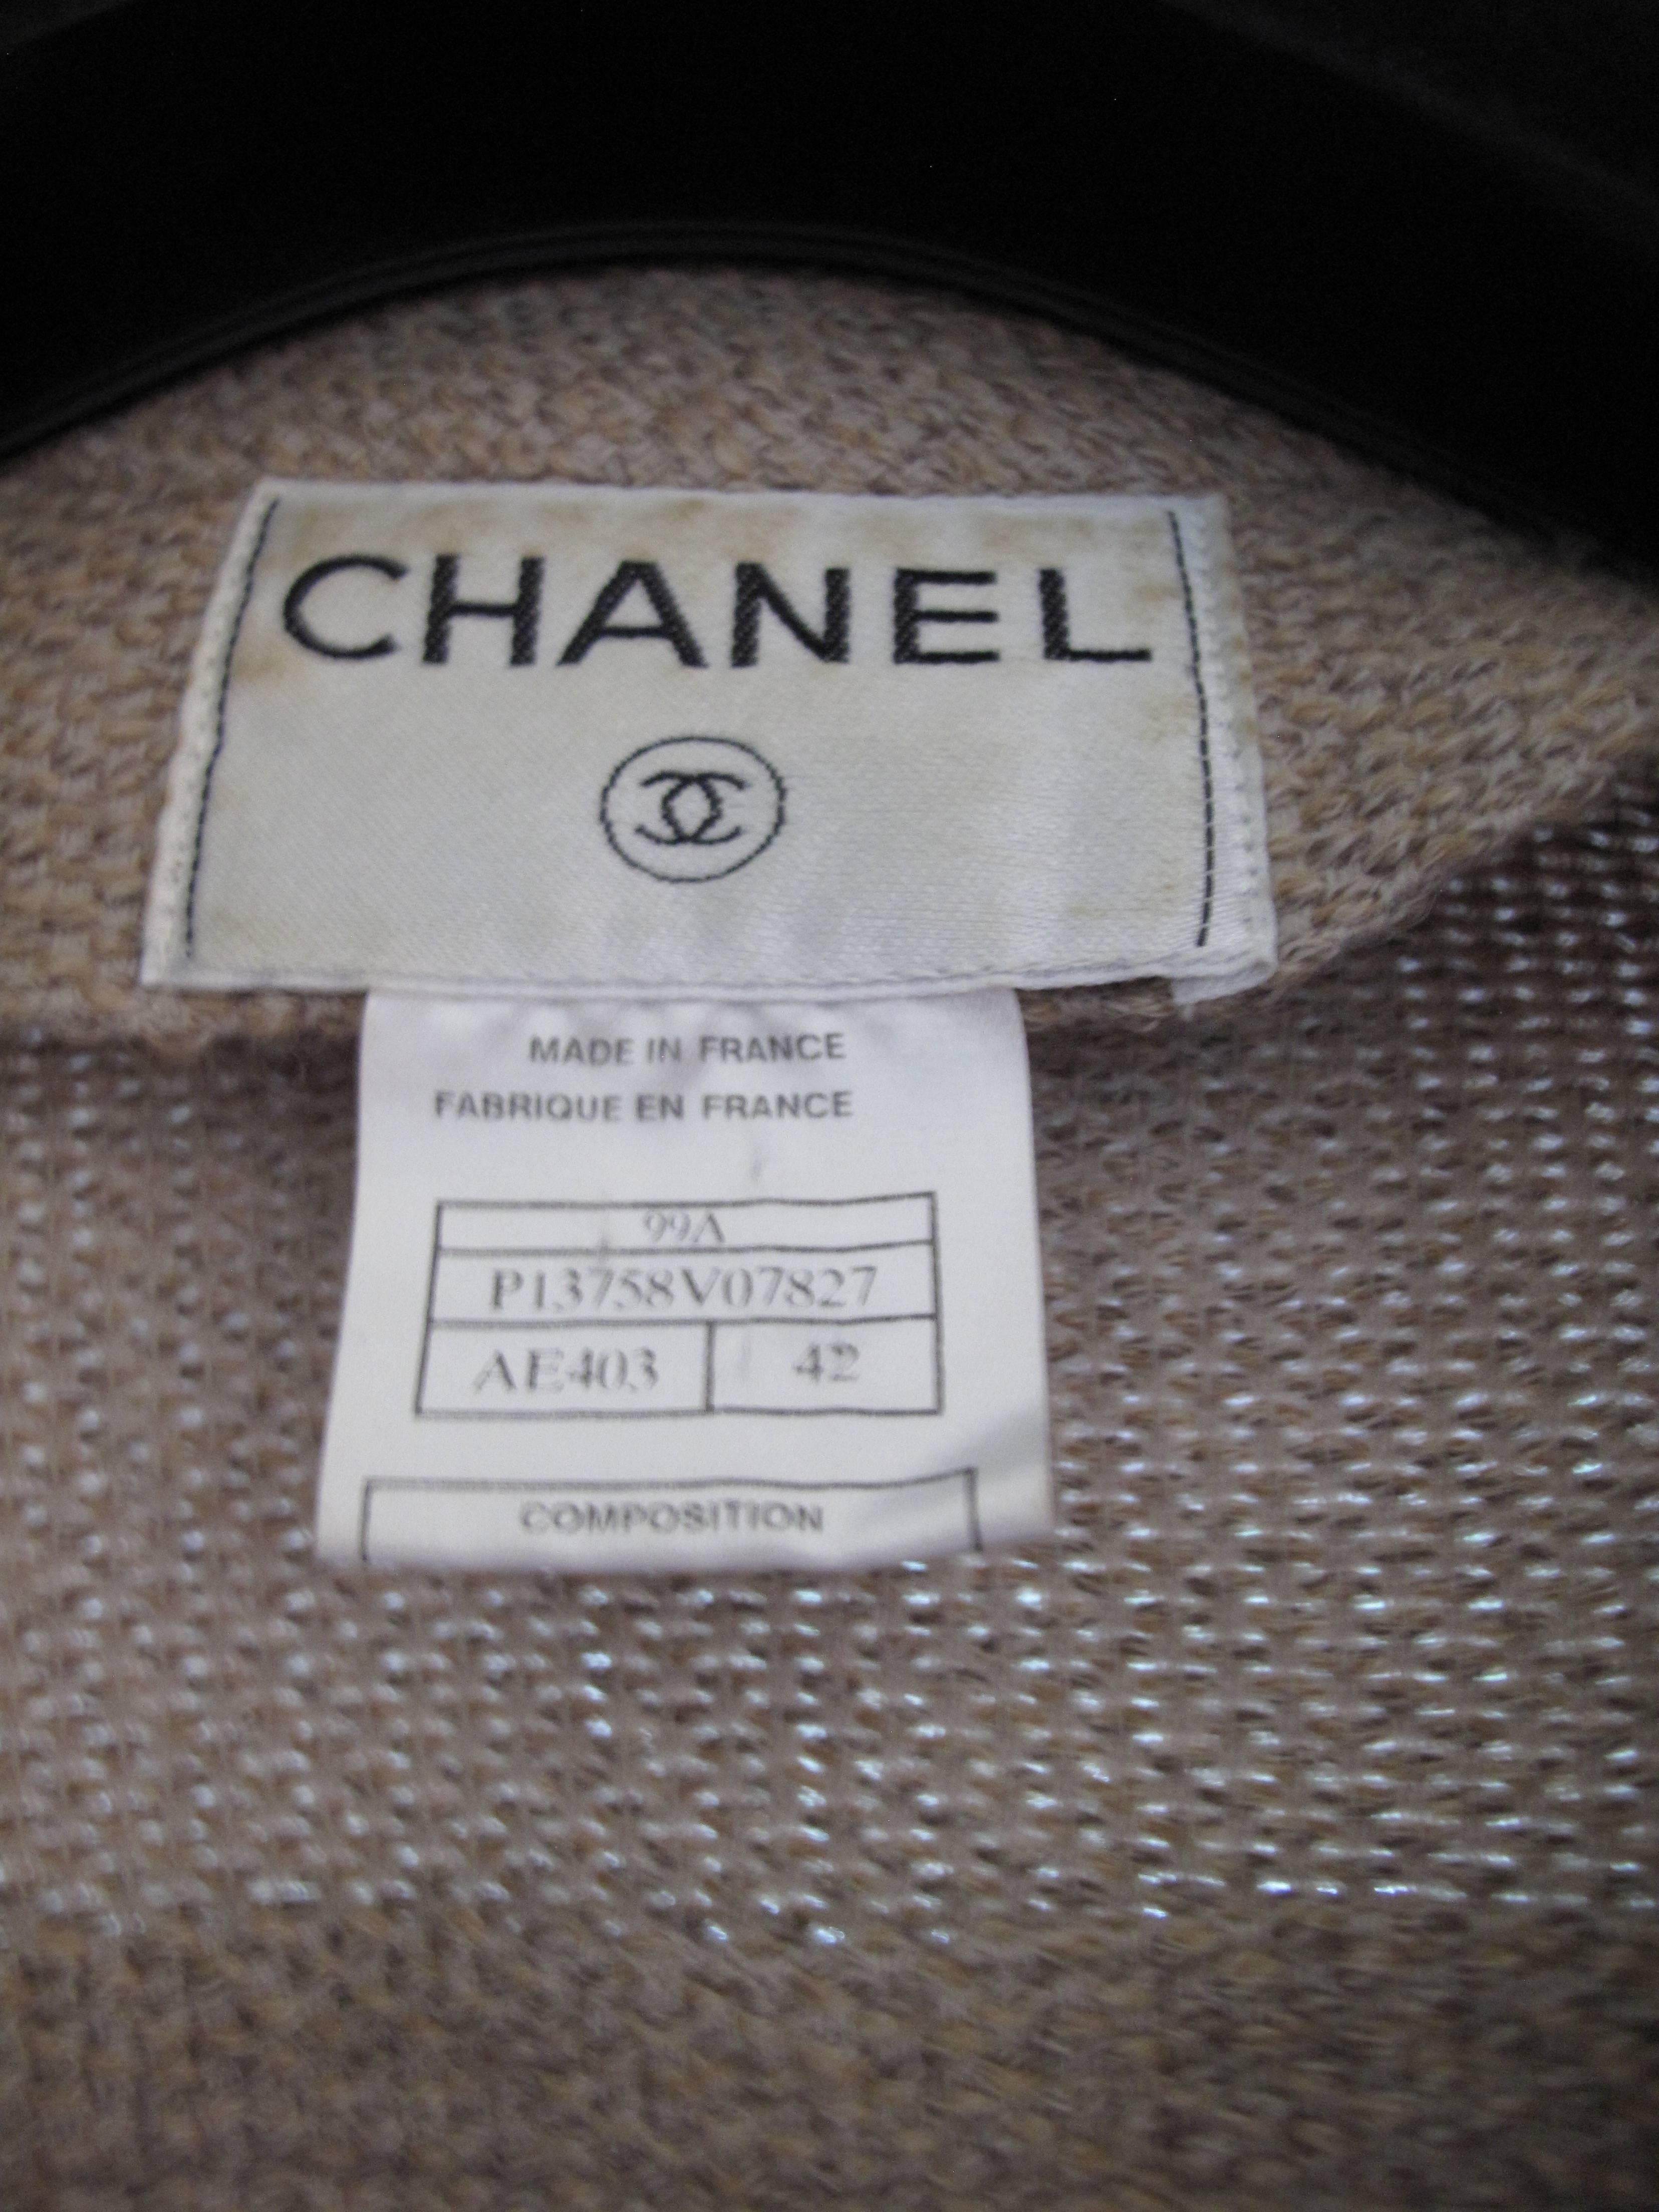 1999 Chanel wool and alpaca short jacket, salmon/ grey, taupe suede trim, flap pockets, hook and eye closure.  Extra fabric swatch.  Chain at hem. No lining. Condition: Excellent. 42/ US 8 ( mannequin is a US size 6 )

We accept returns for refund,